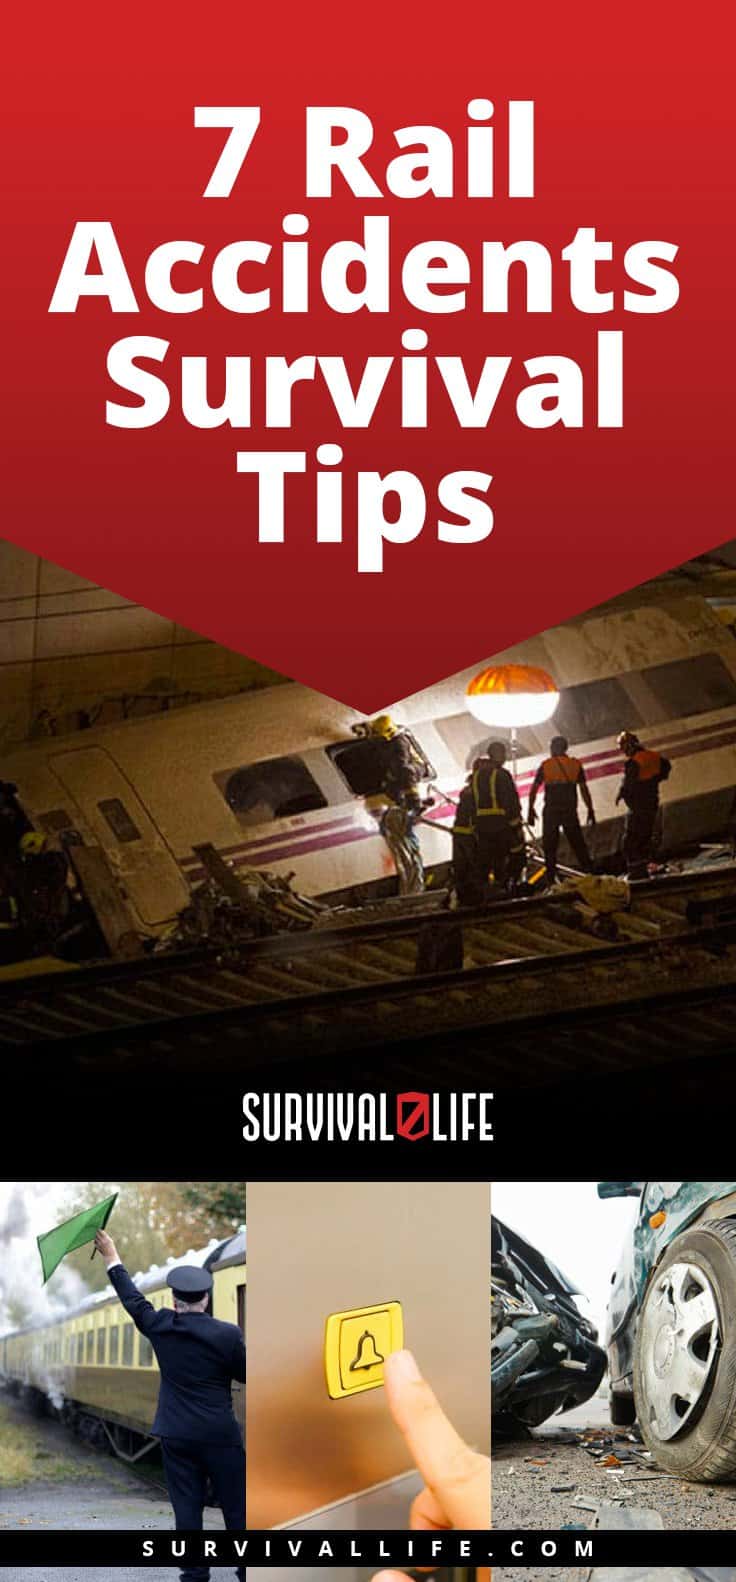 7 Rail Accidents Survival Tips